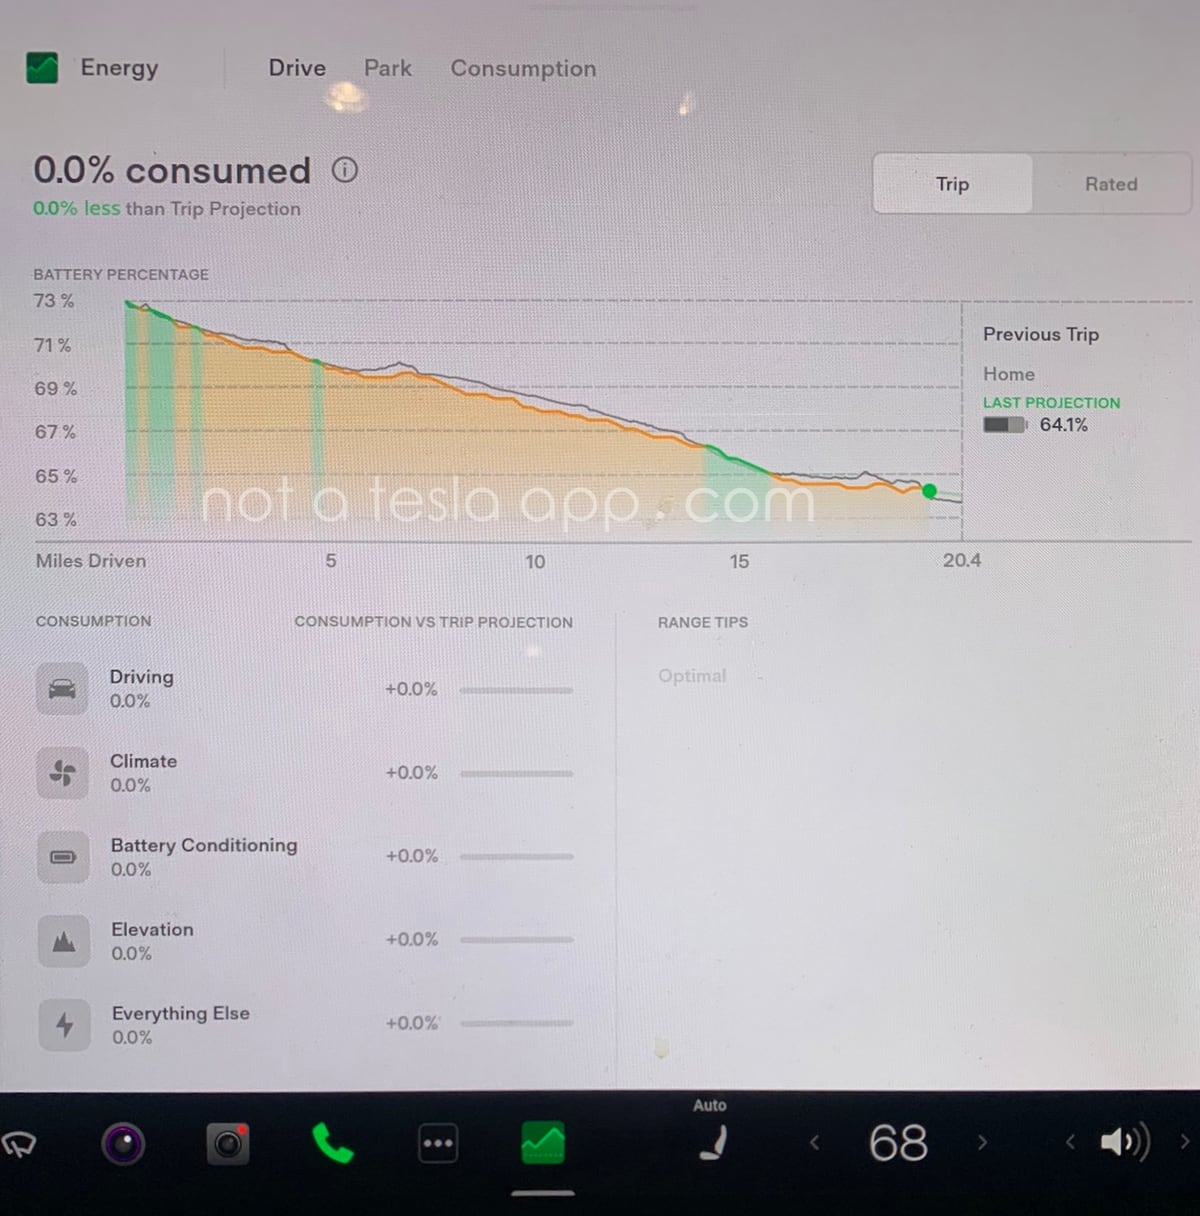 Tesla's new Energy App that will be available in 2022.36